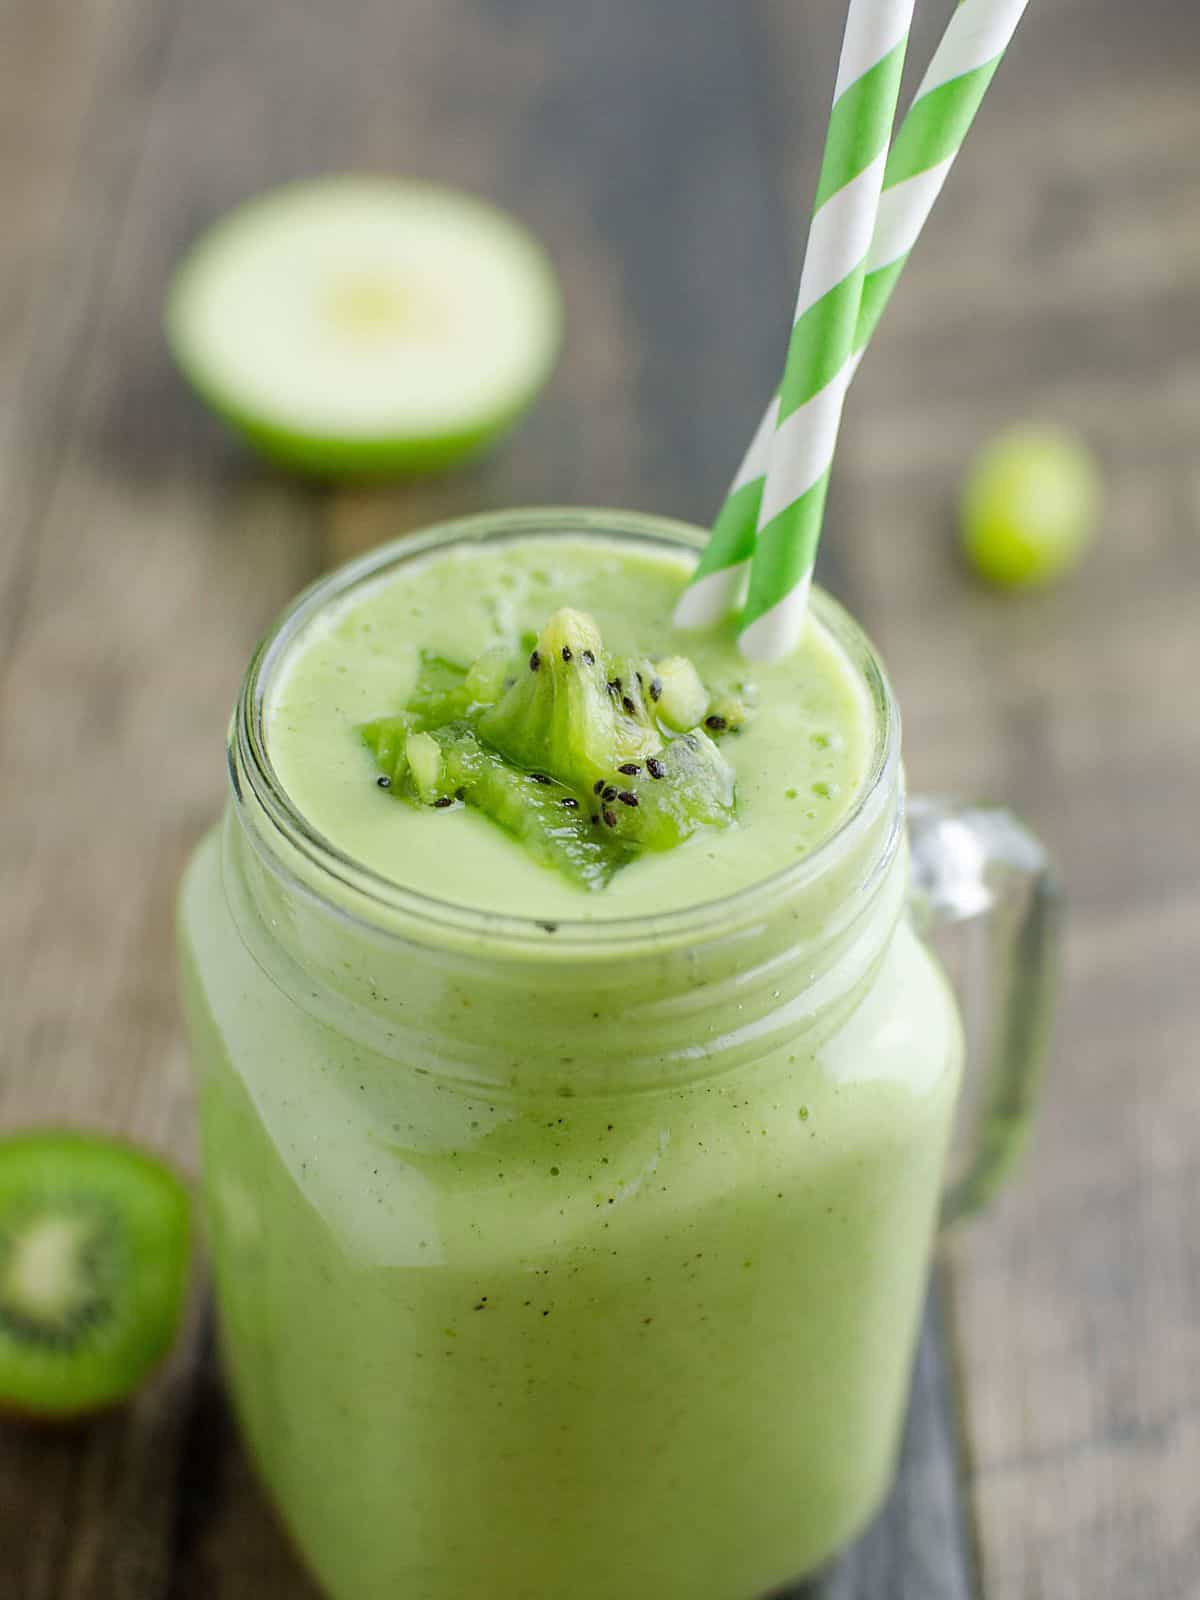 healthy green smoothie garnished with bits of kiwi in a glass jar mug.